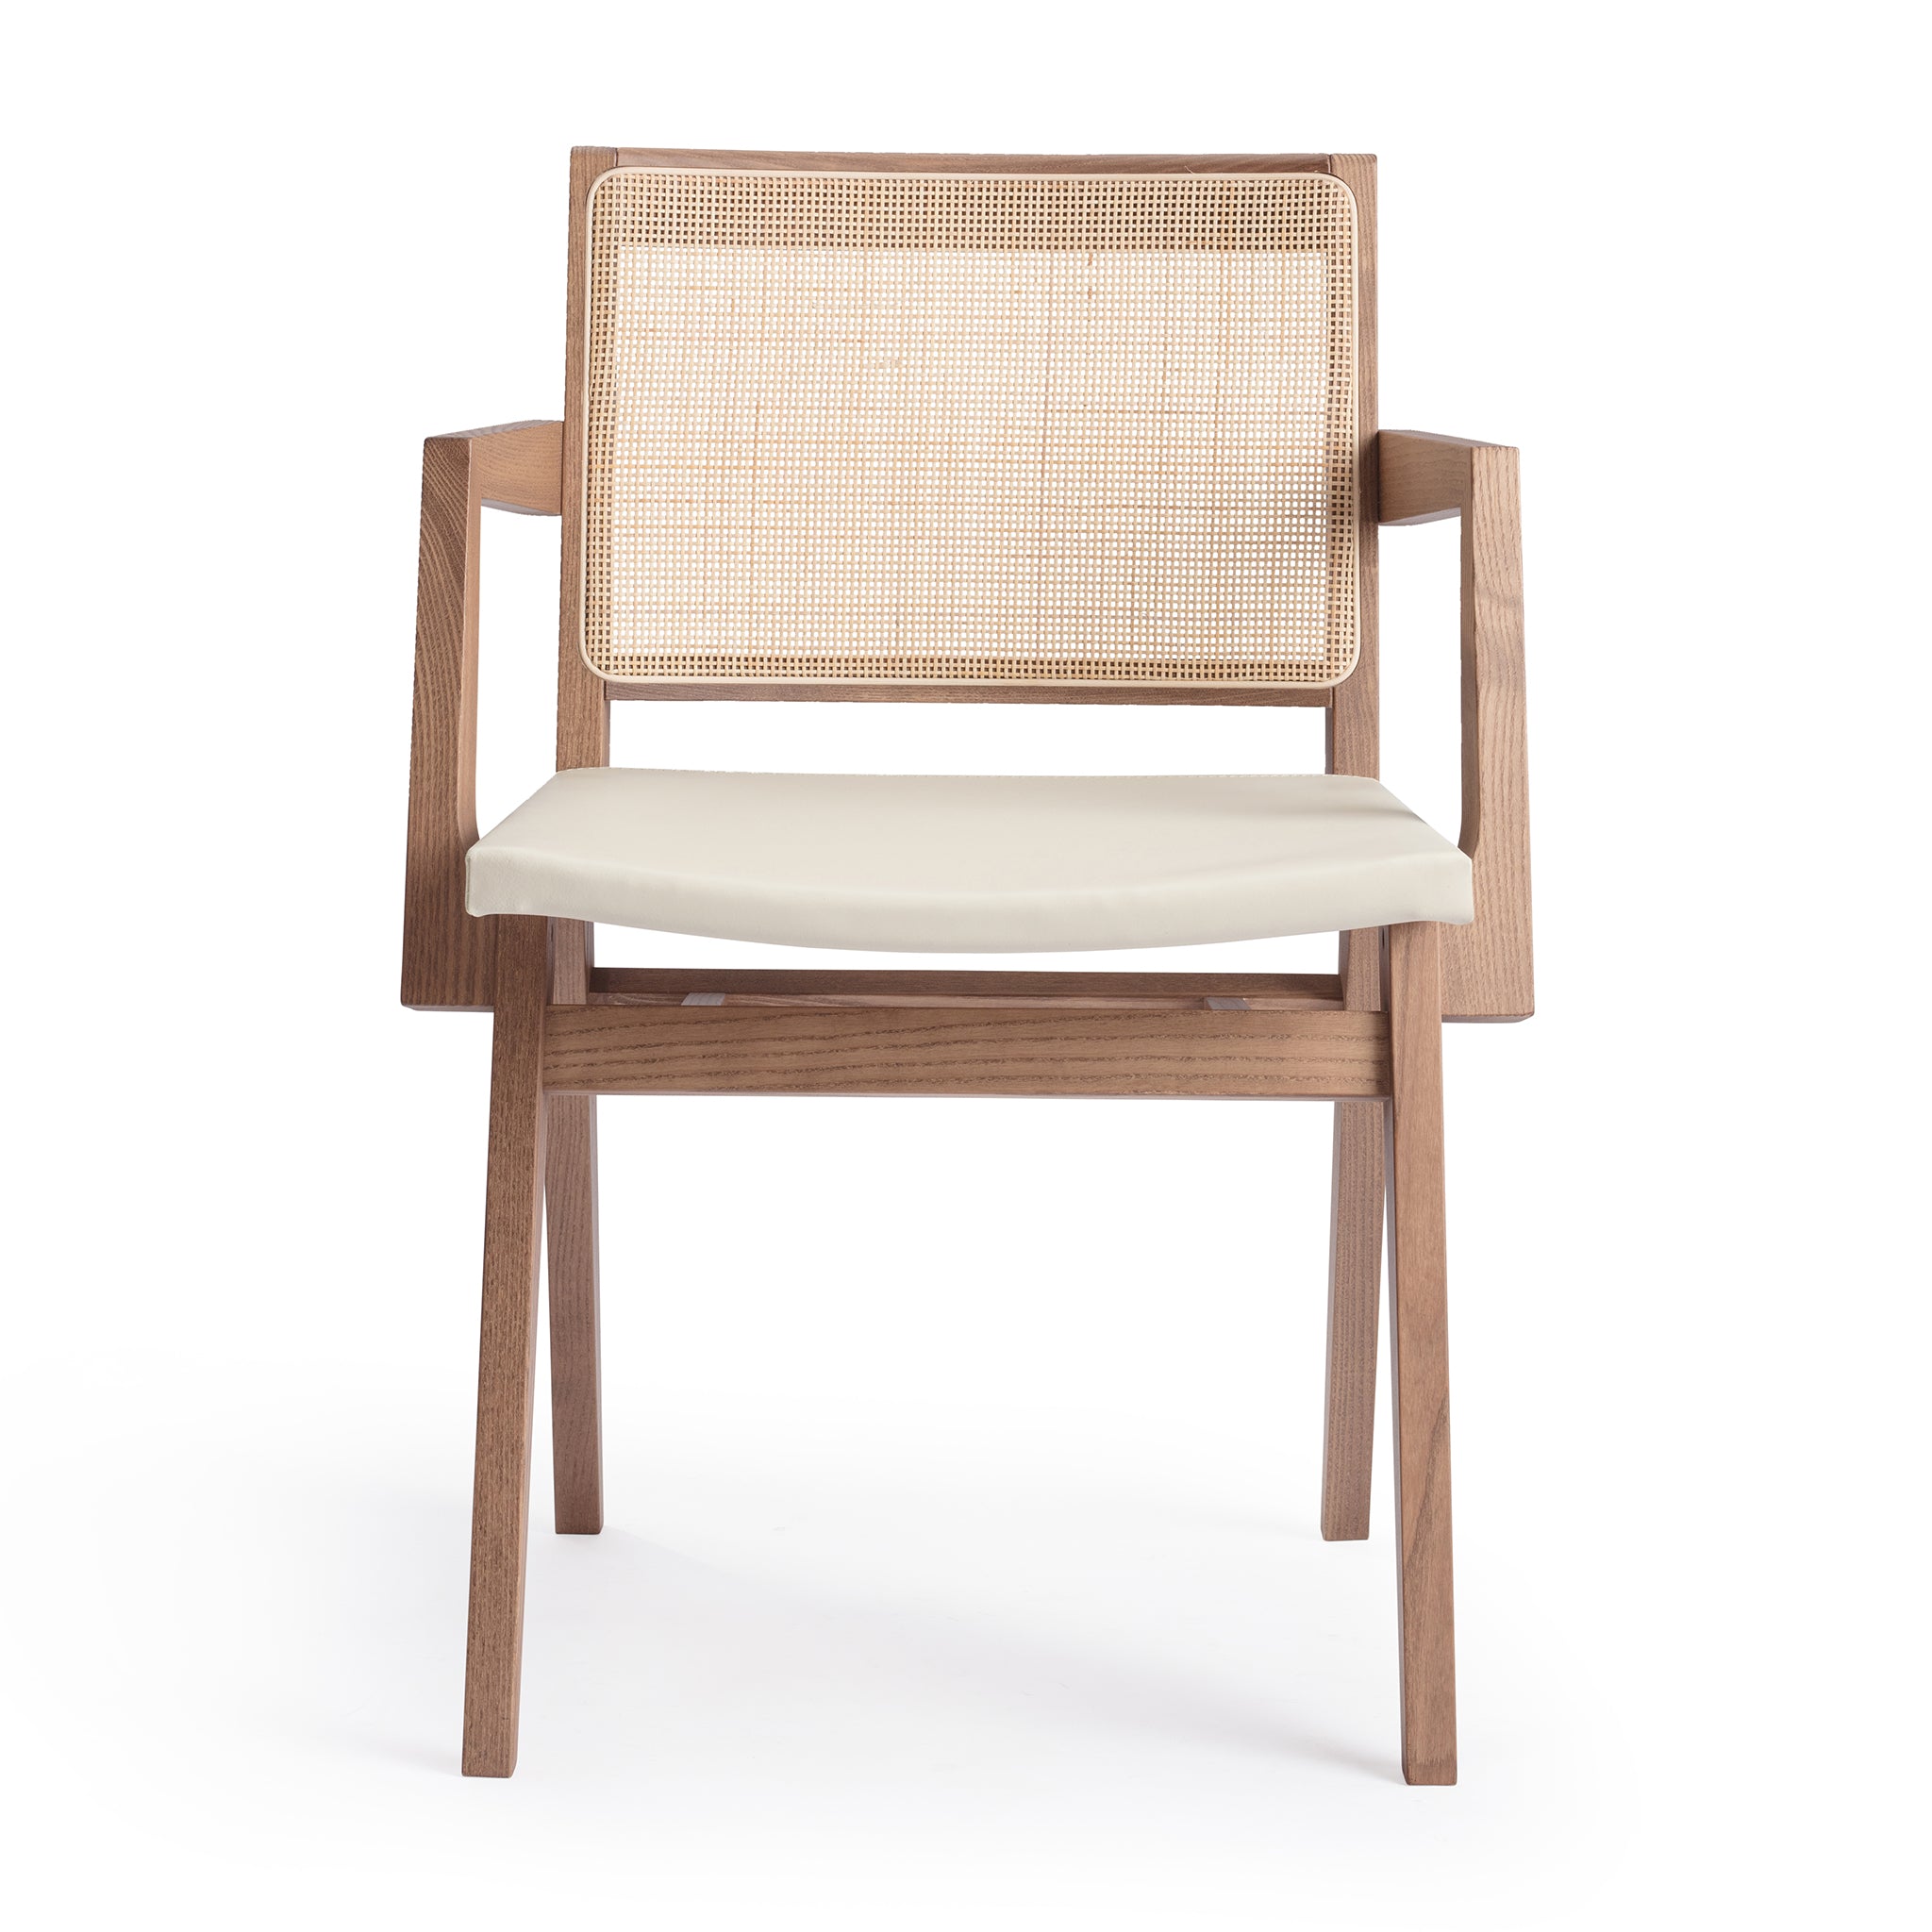 Front view of an "Elye" designer dining chair, walnut stained ash frame, square weave cane back, contract grade off white leather seat, produced by Klarel in Italy. #K40-1